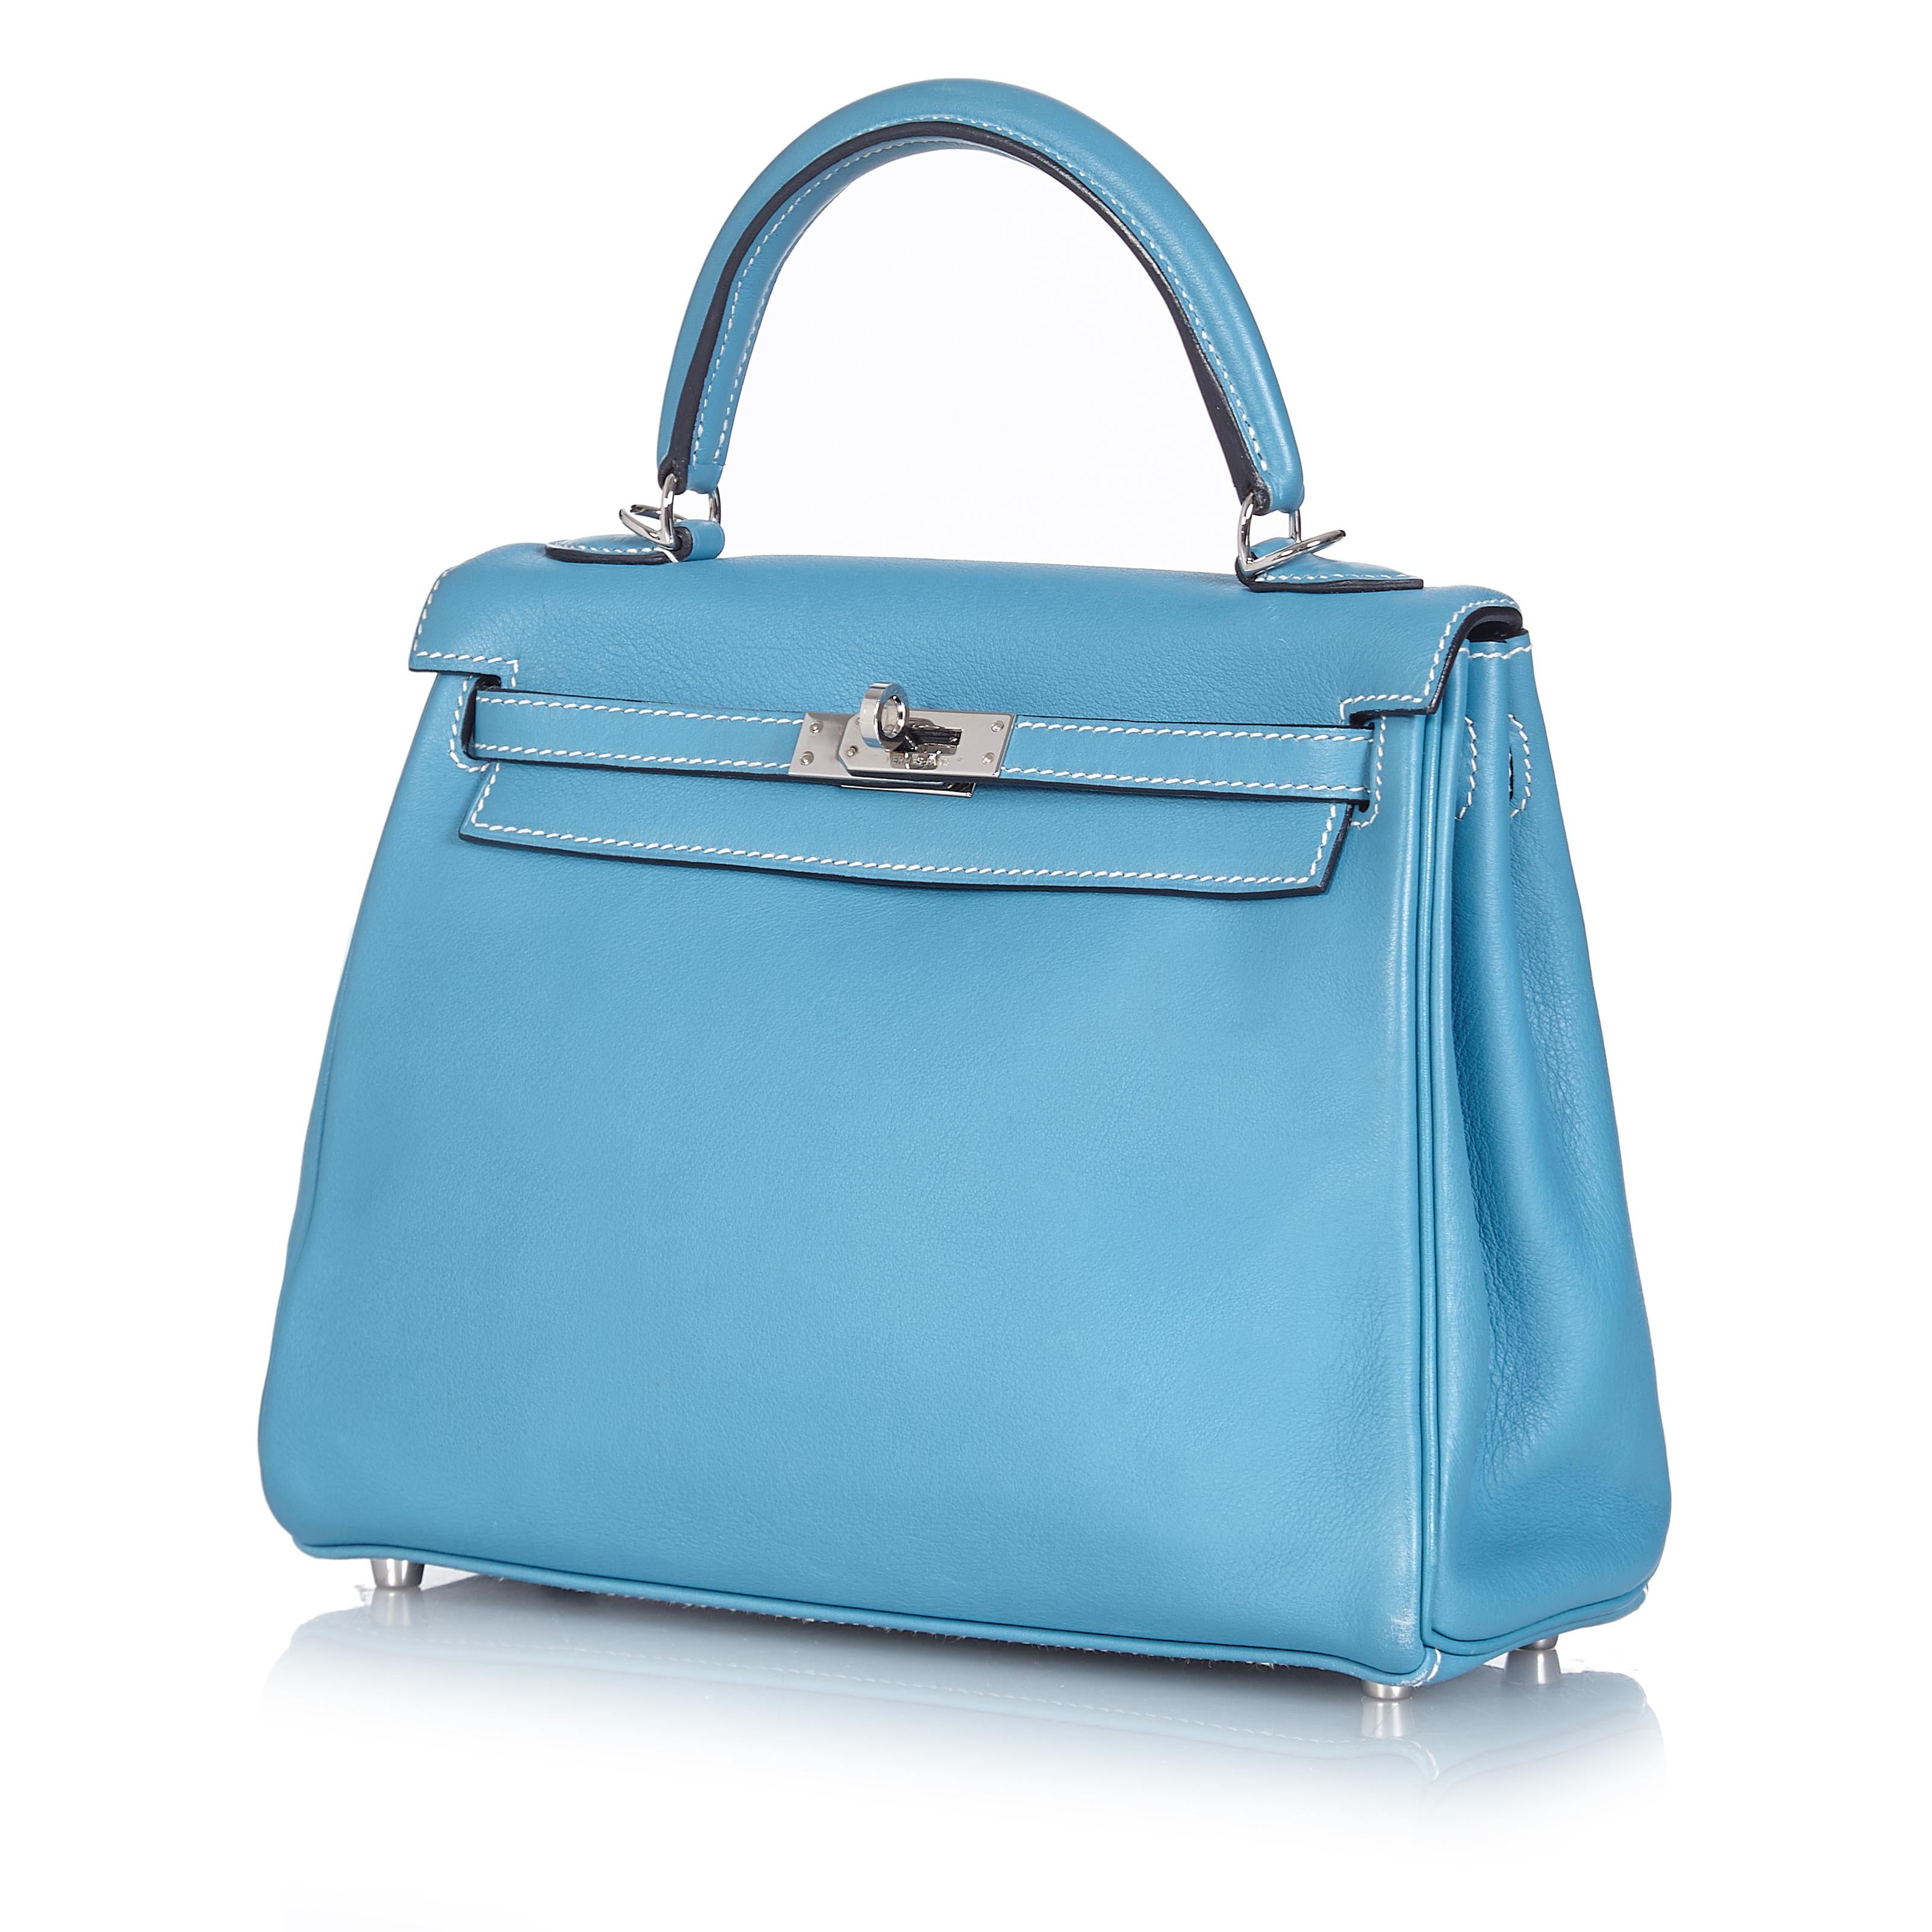 In a highly sought-after compact size, this Hermès Kelly 25 bag makes an irresistibly feminine statement. Expertly crafted in France from a supple blue jean Swift leather, hand stitched by skilled craftsmen in a contrasting white and accented by